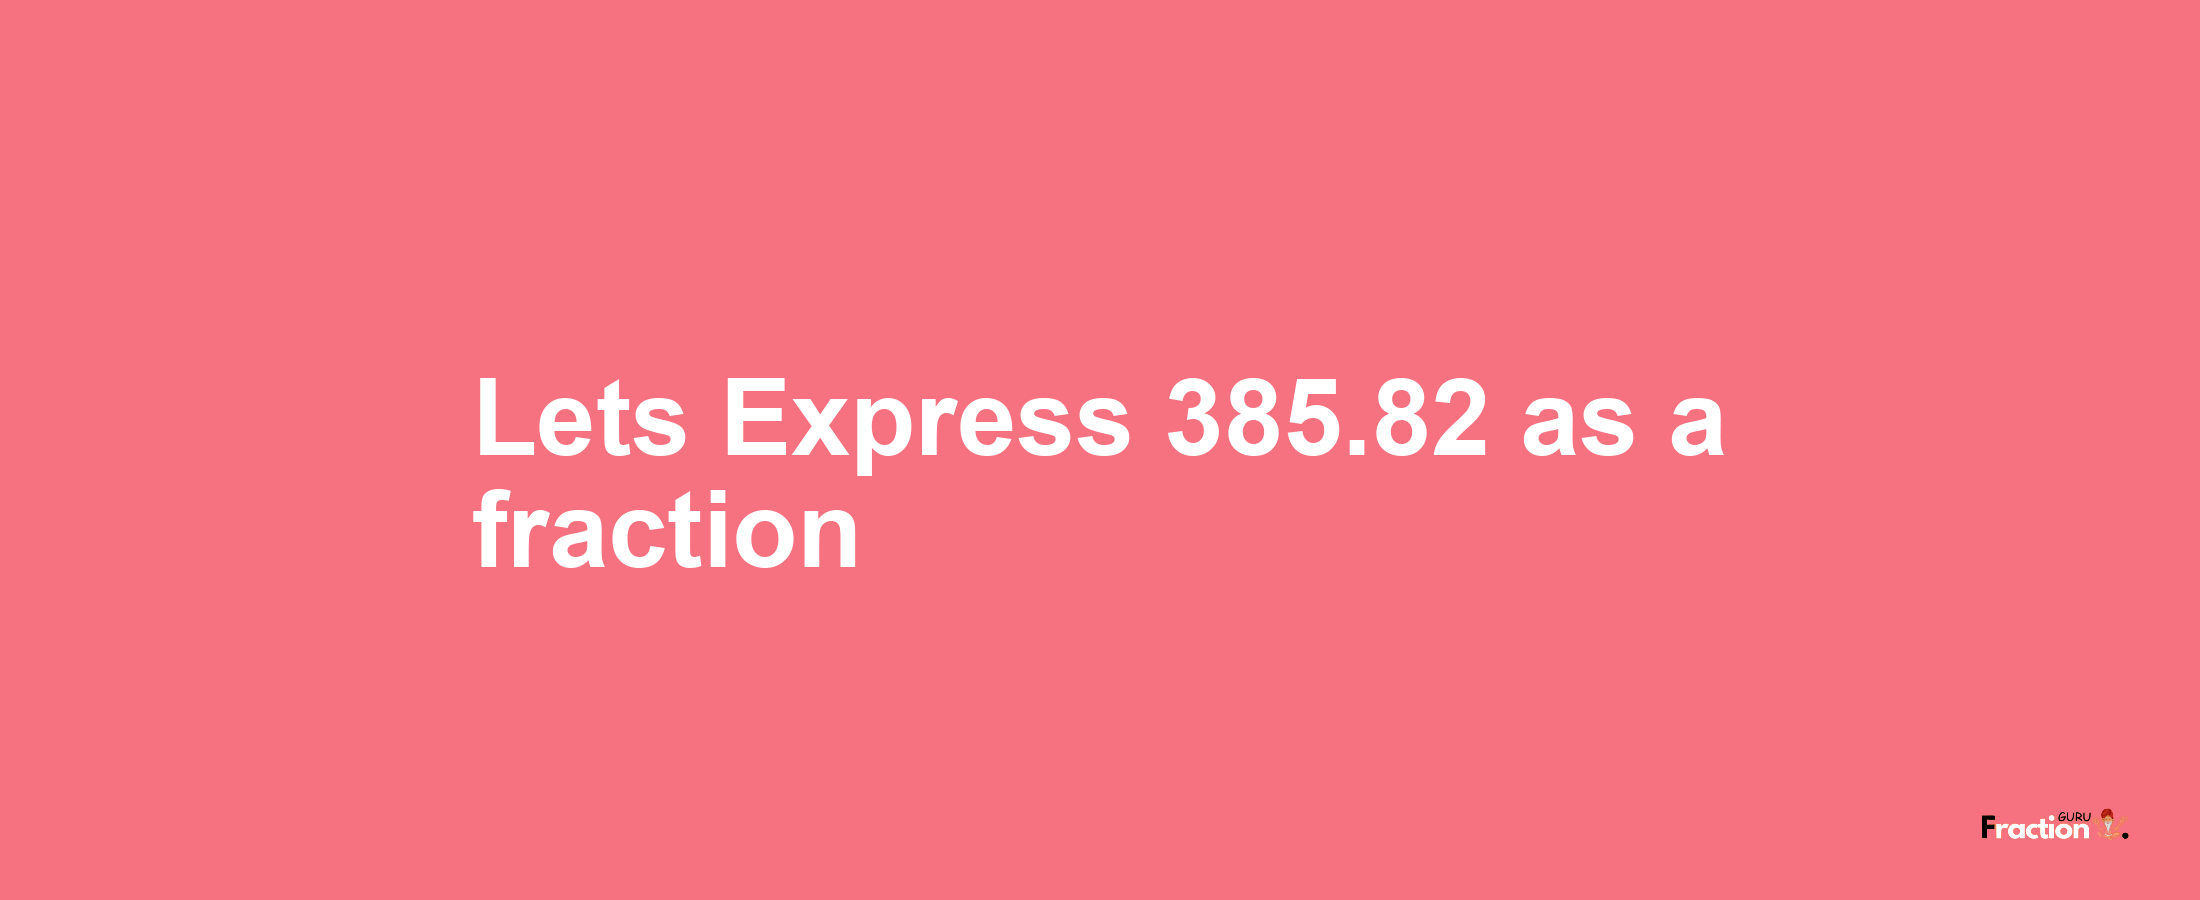 Lets Express 385.82 as afraction